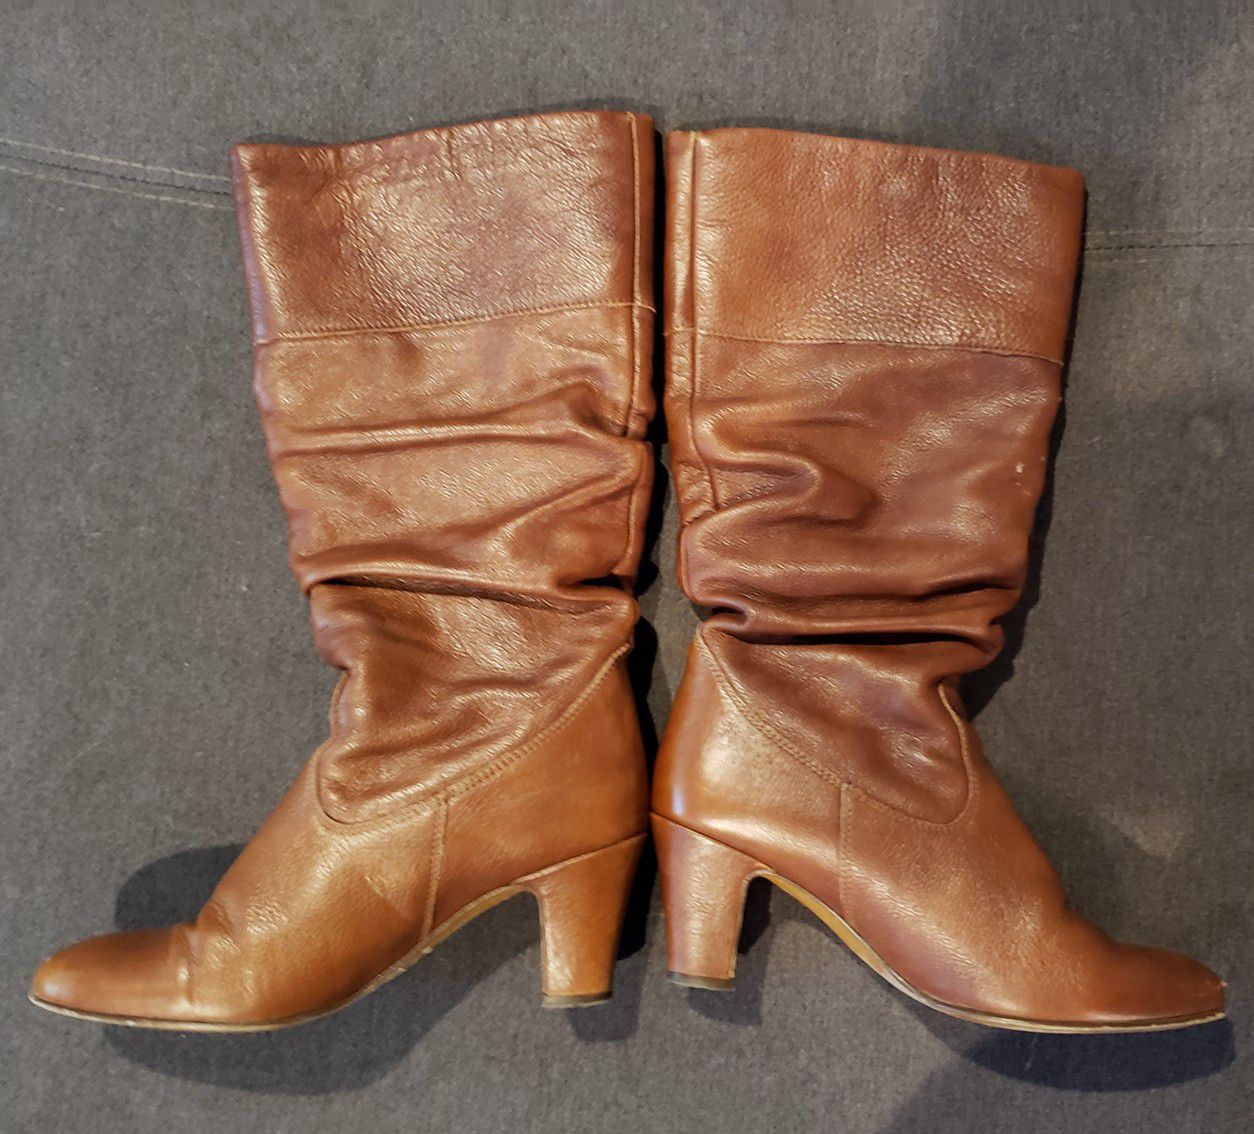 ALDO slouch tan boots size 8